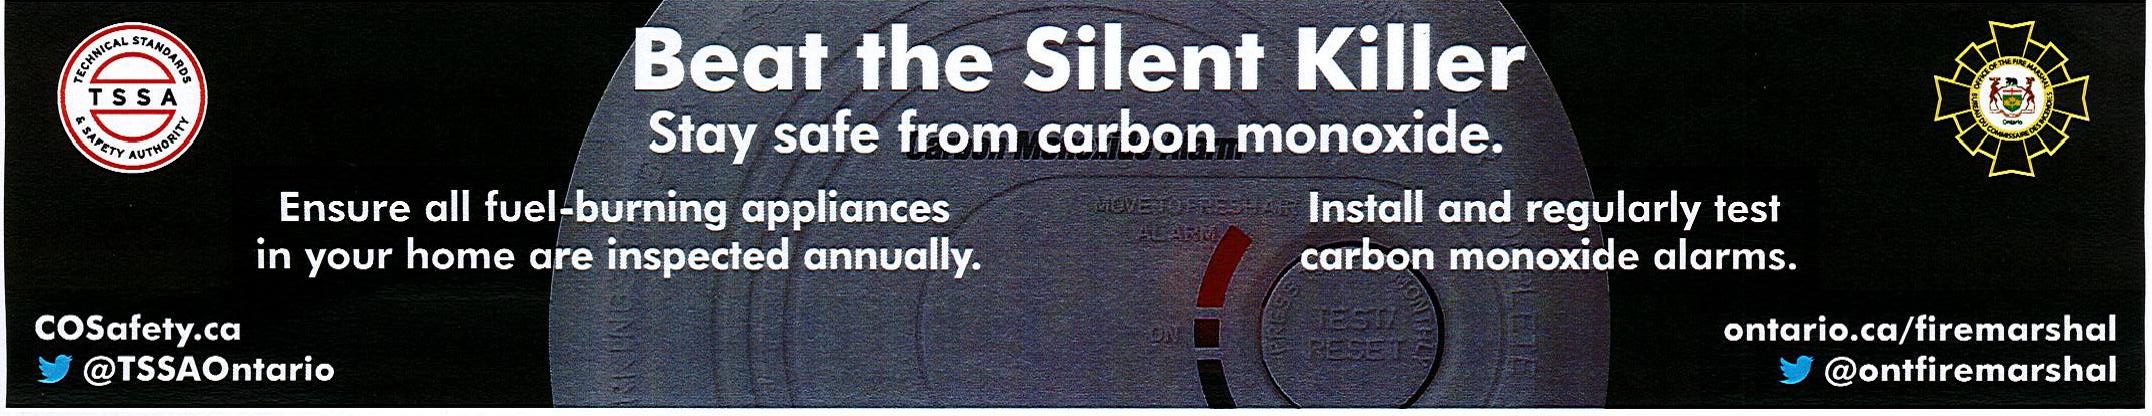 poster depicting stay safe from carbon monoxide